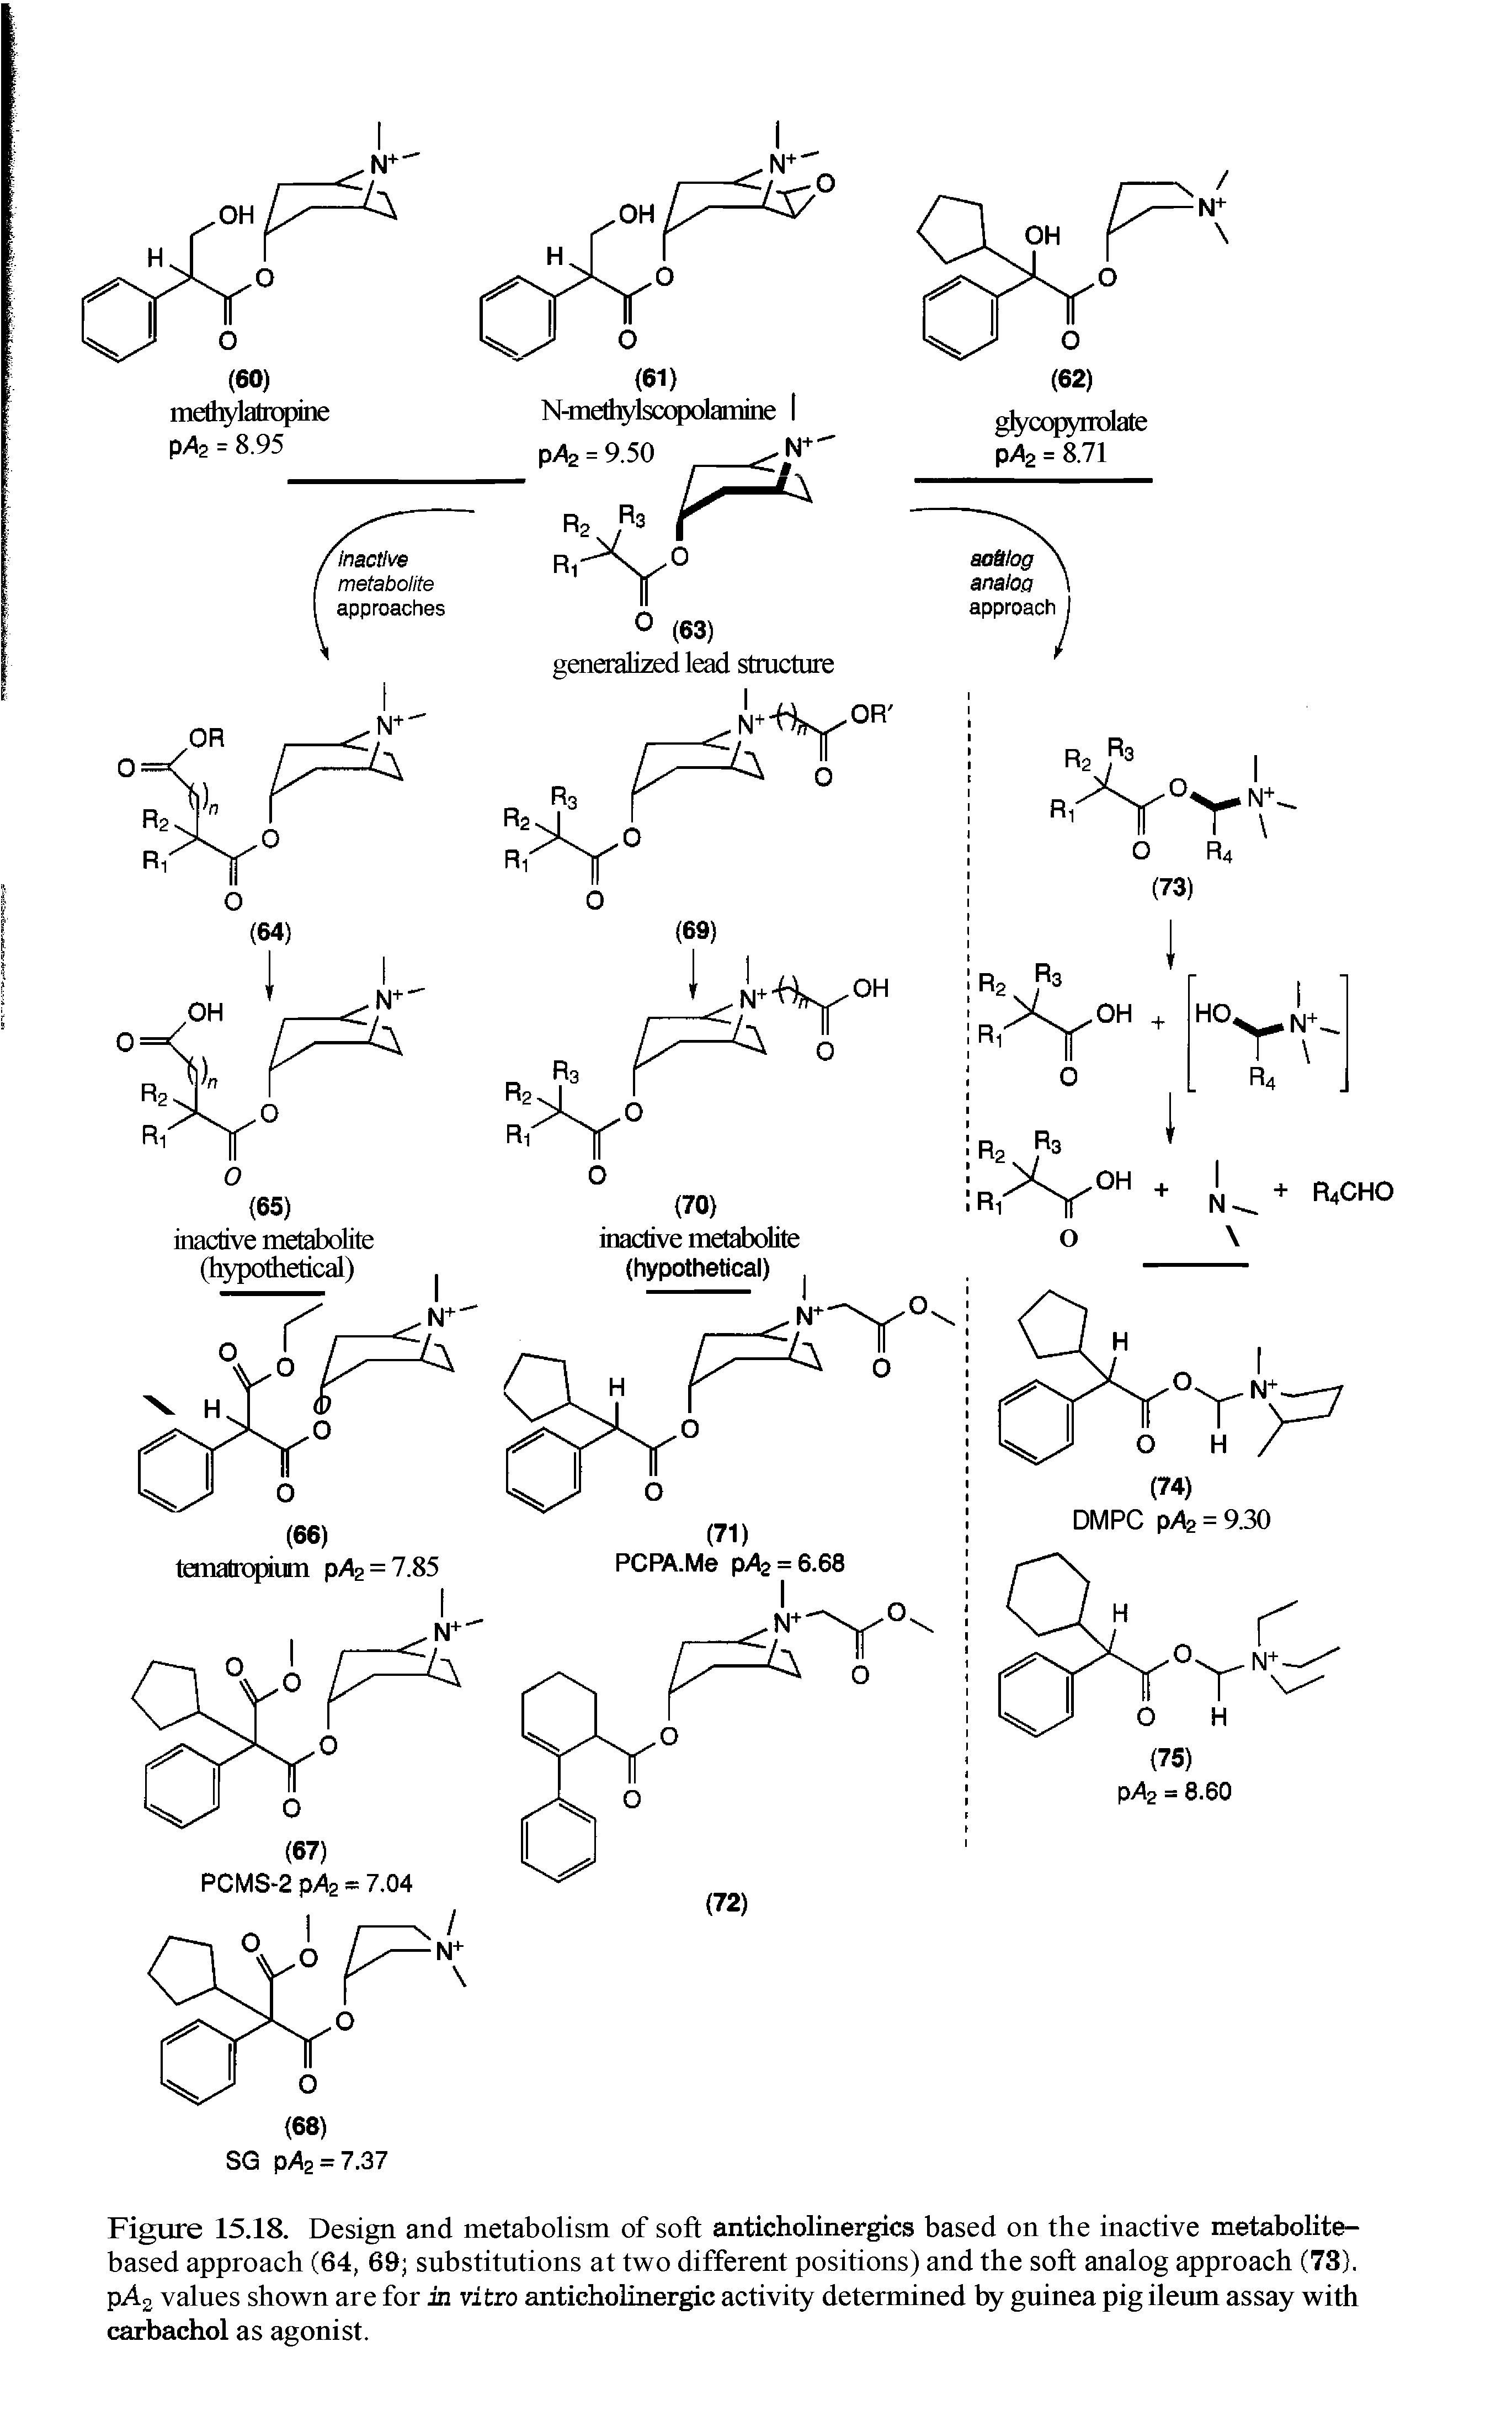 Figure 15.18. Design and metabolism of soft anticholinergics based on the inactive metabolite-based approach (64, 69 substitutions at two different positions) and the soft analog approach (73). pAg values shown are for in vitro anticholinergic activity determined by guinea pig ileum assay with carbachol as agonist.